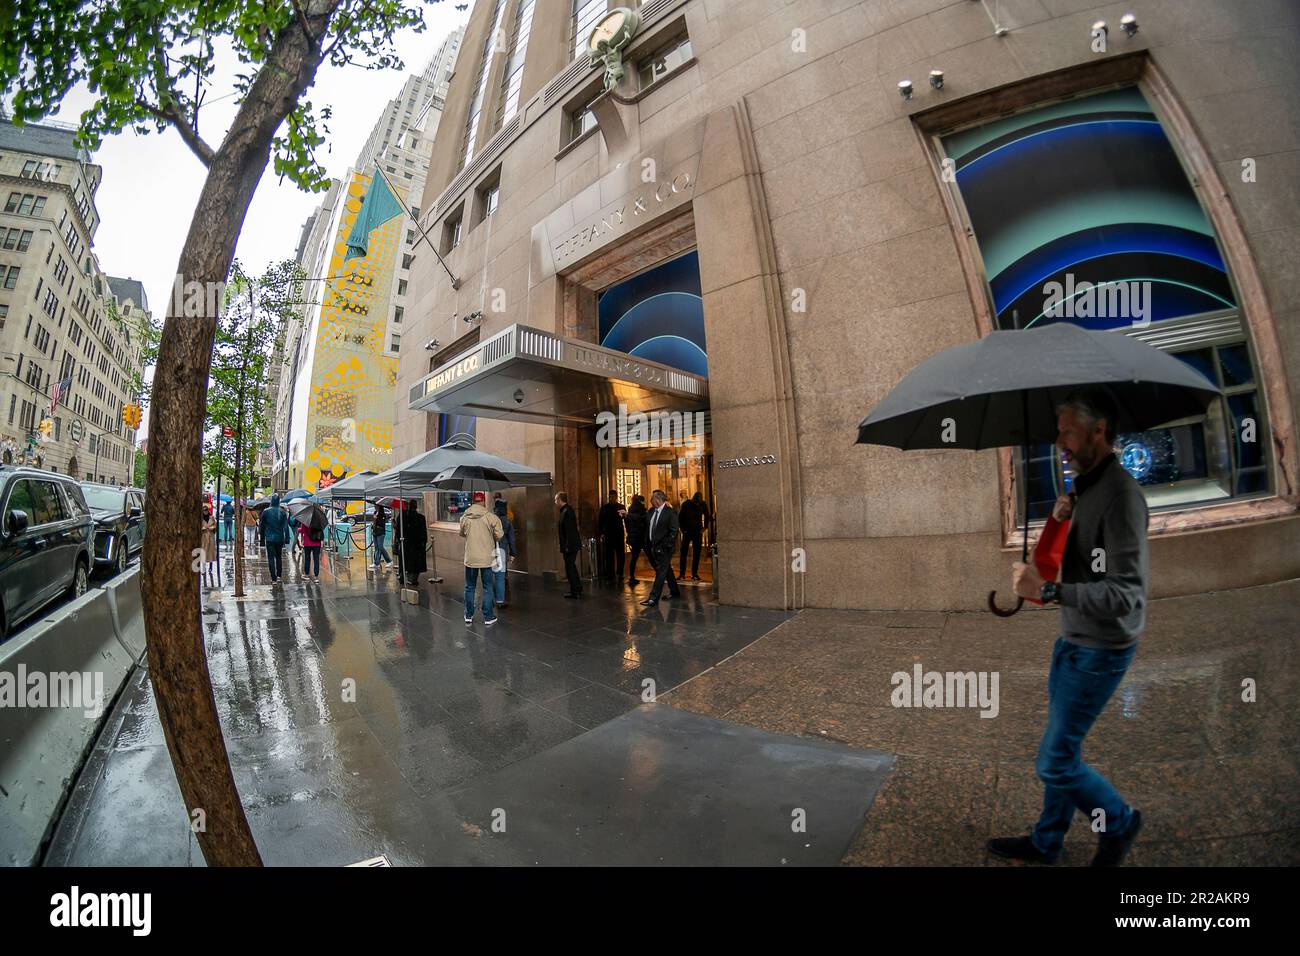 Tiffanys Louis Vuitton 5th Ave 57th Street 2014 Stock Photo - Download  Image Now - Adult, Alertness, Architecture - iStock